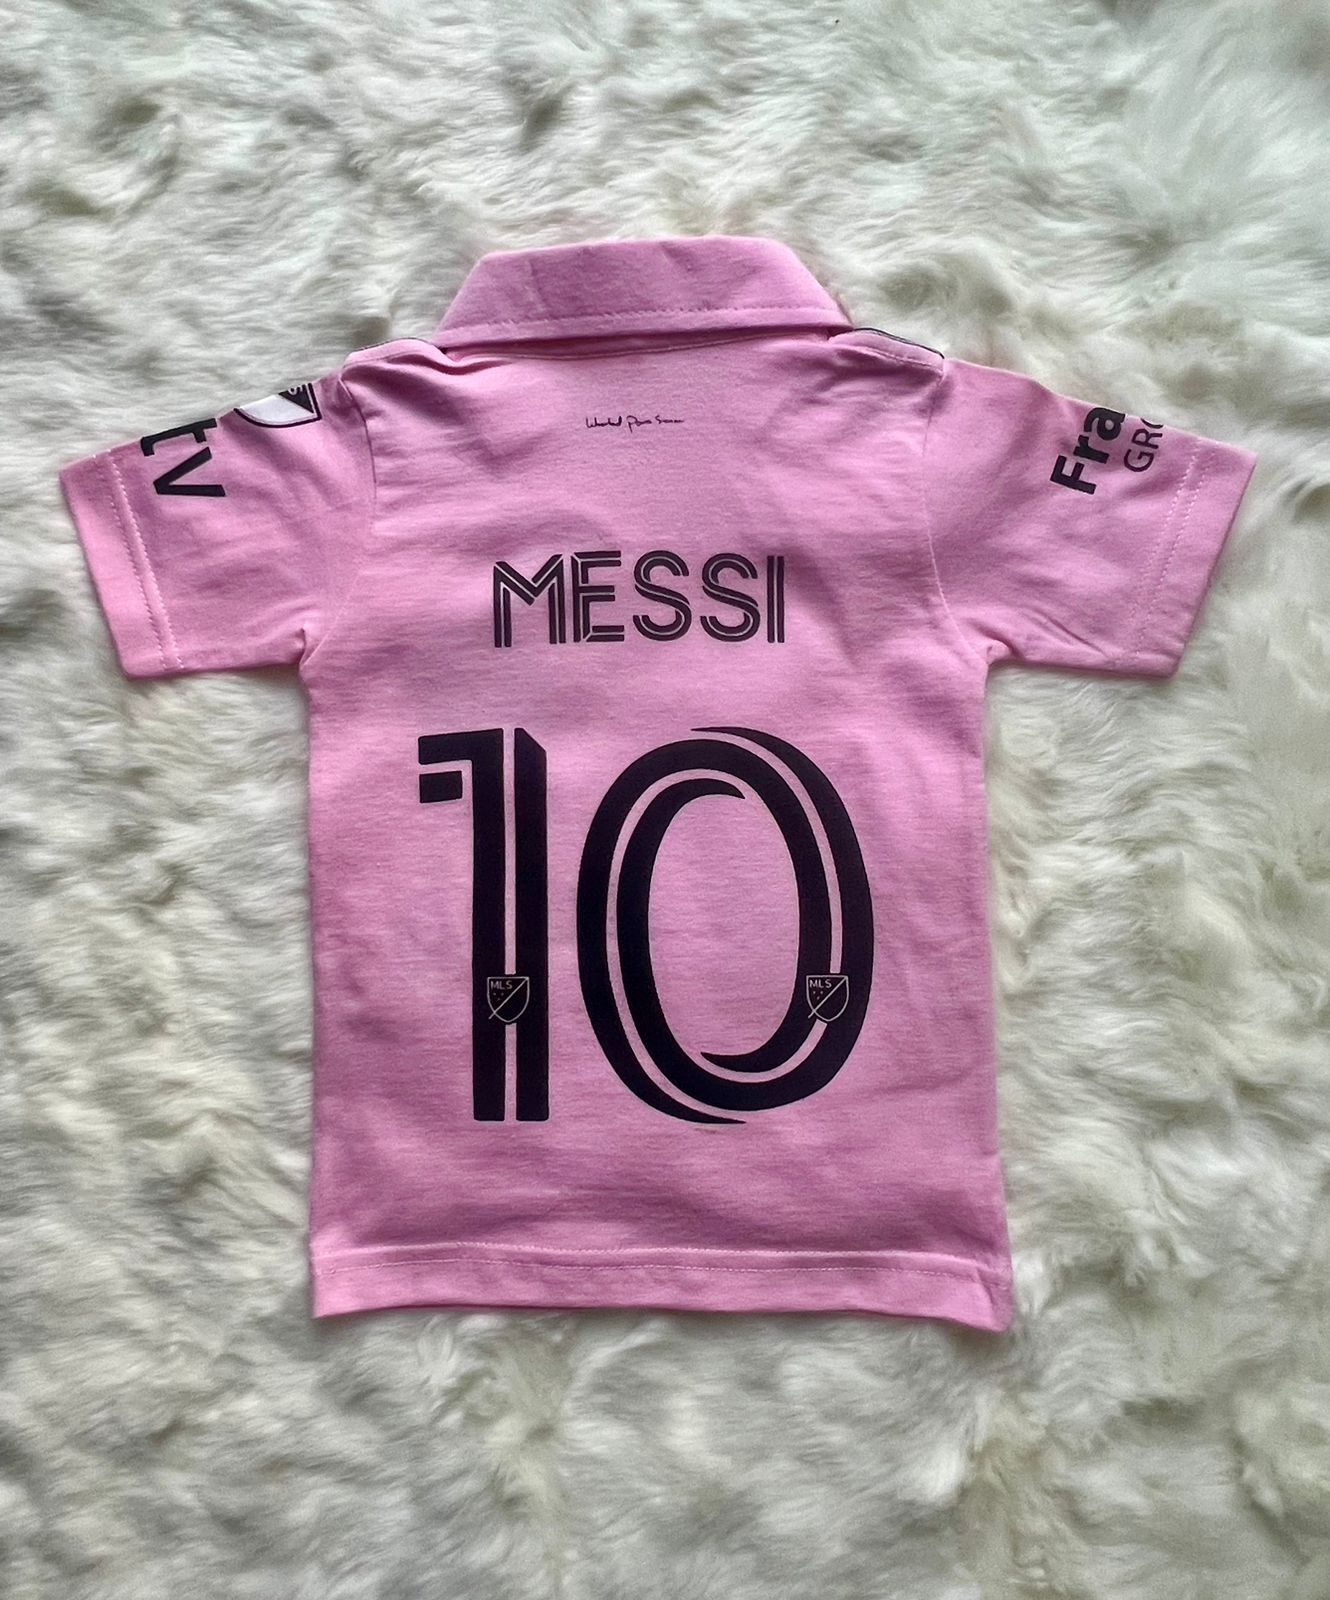 Little Legend Lionel Messi Baby/Toddler Shirt - Your Tiniest Fan's Gateway to Greatness!